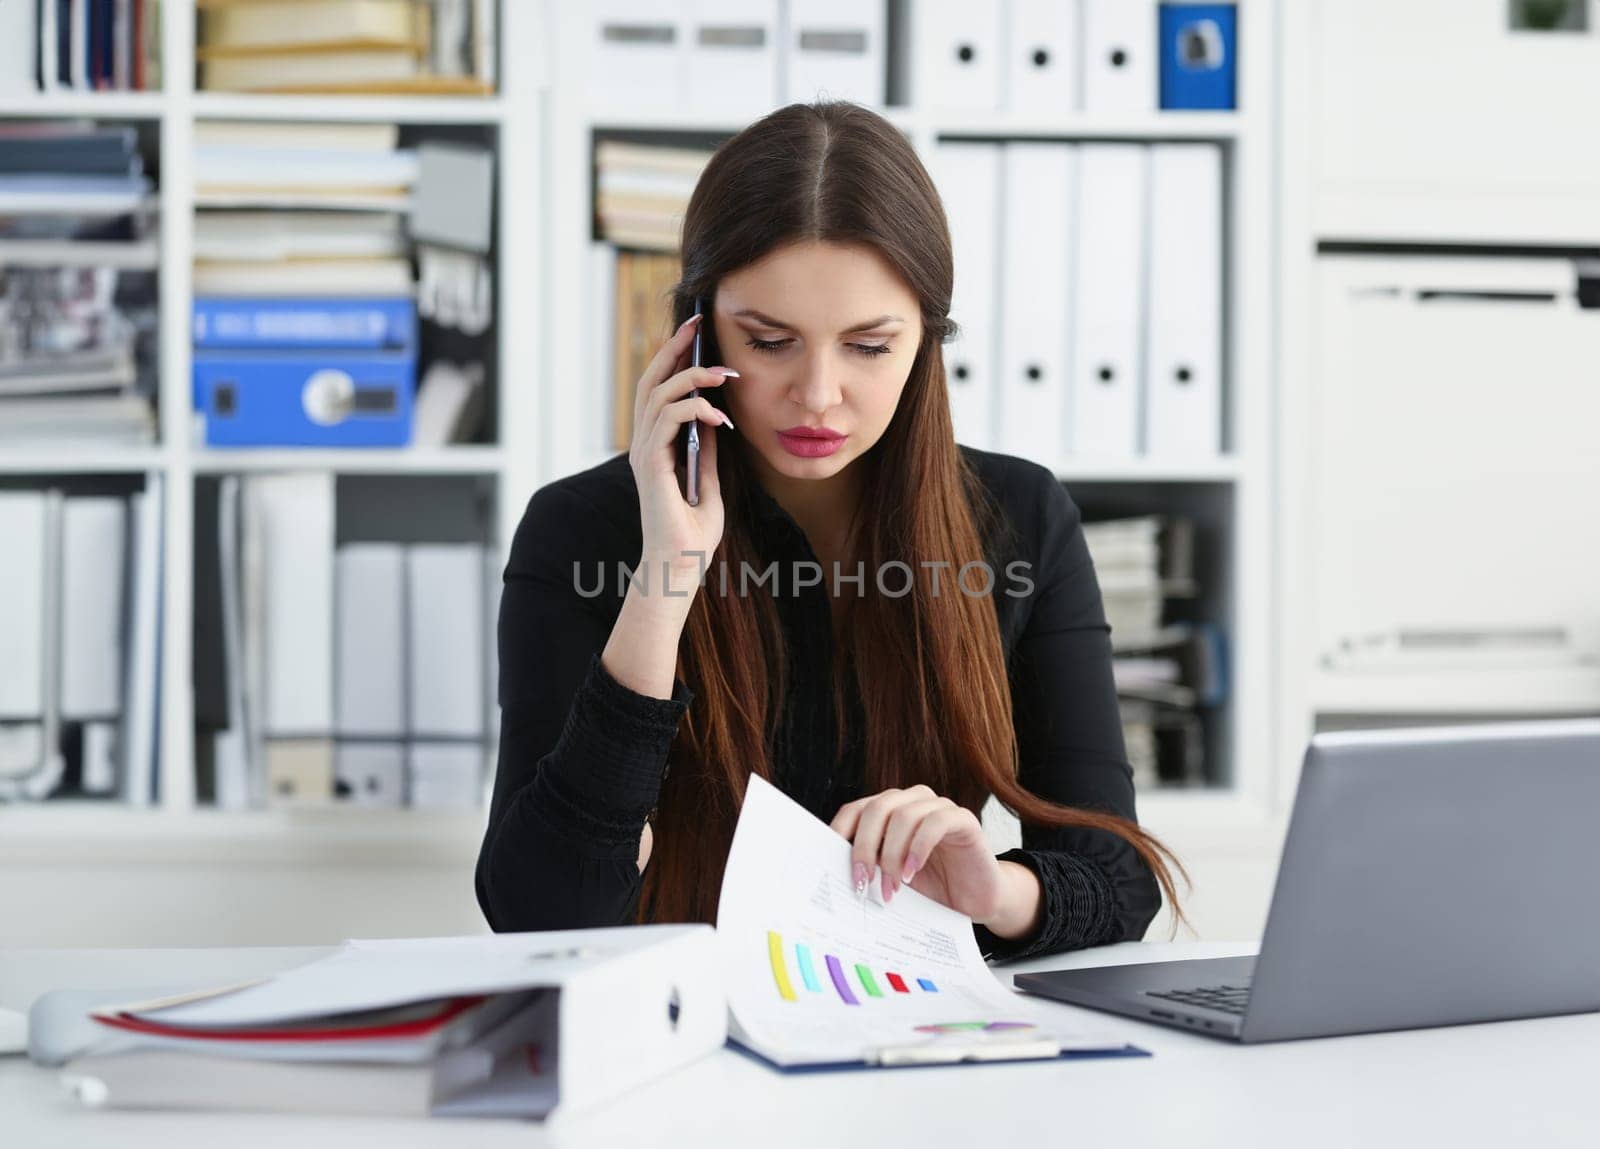 Beautiful brunette smiling businesswoman hold in arm cellphone in office workplace portrait. Stay in touch negotiate meeting job white collar busy life style electronic device store training concept